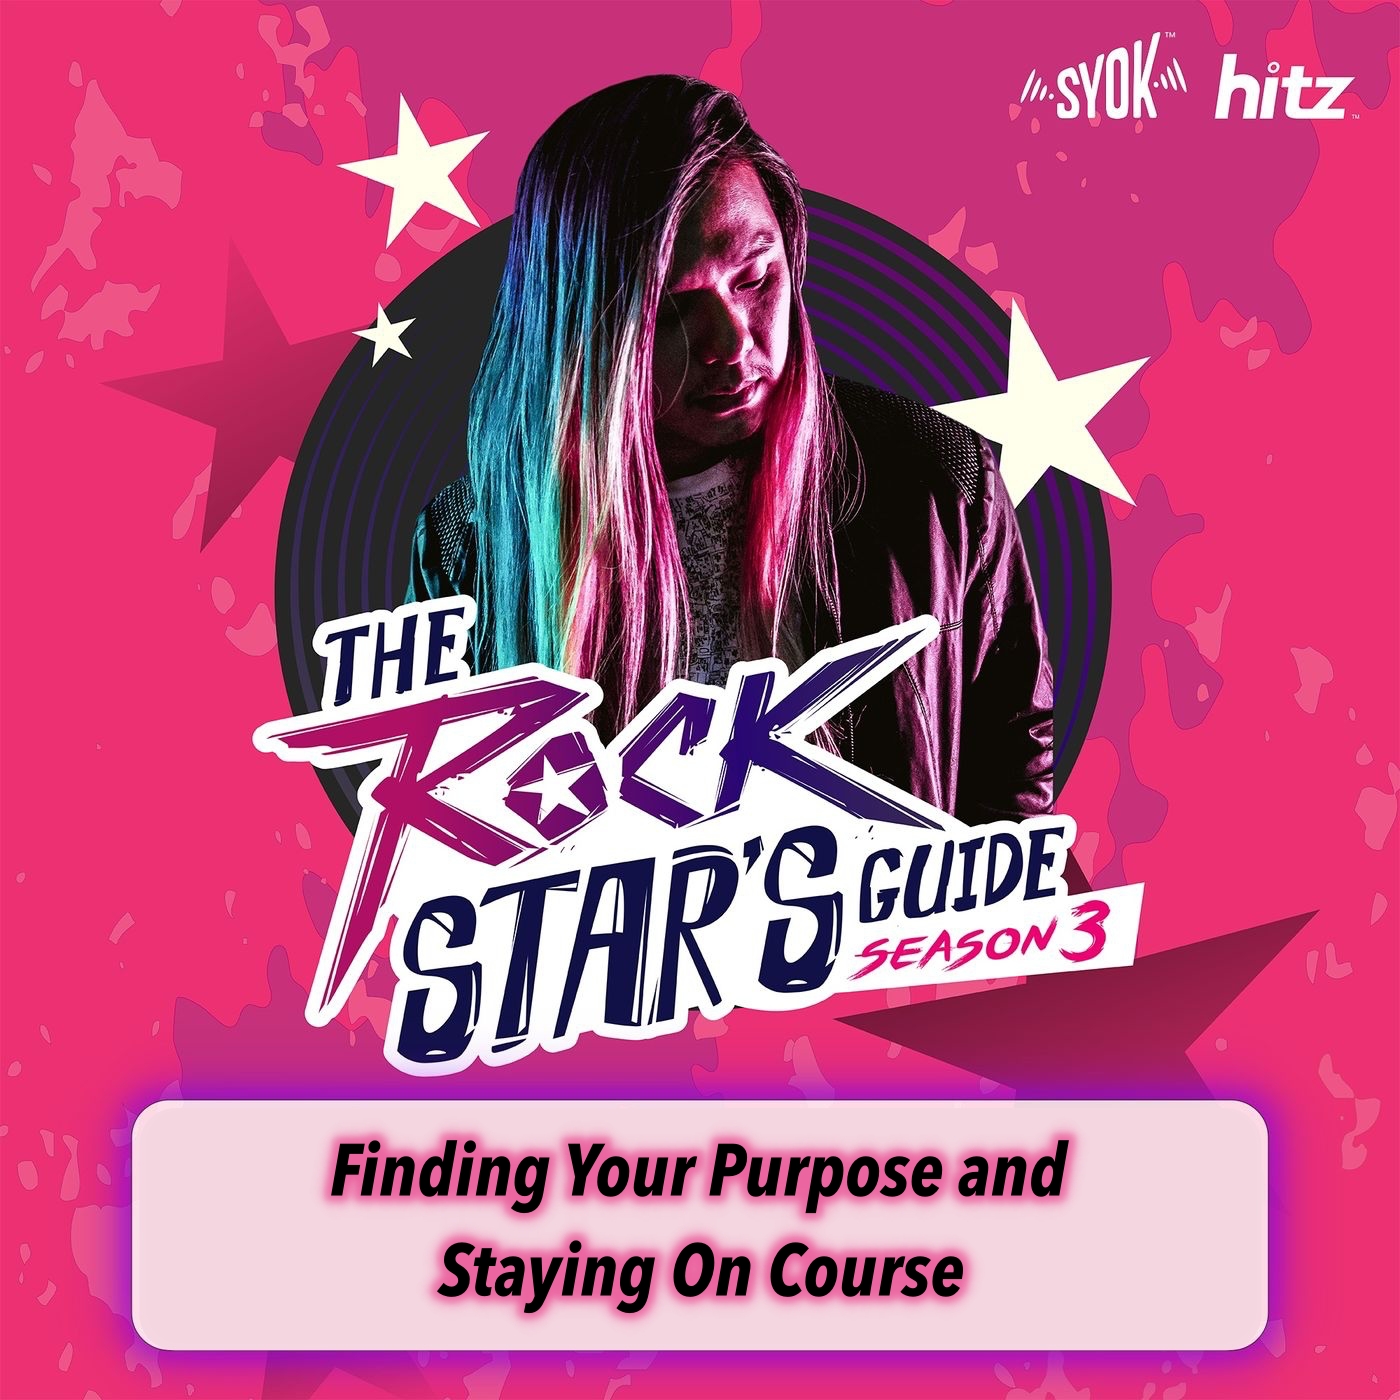 Finding Your Purpose and Staying On Course | The Rockstar's Guide S3E20